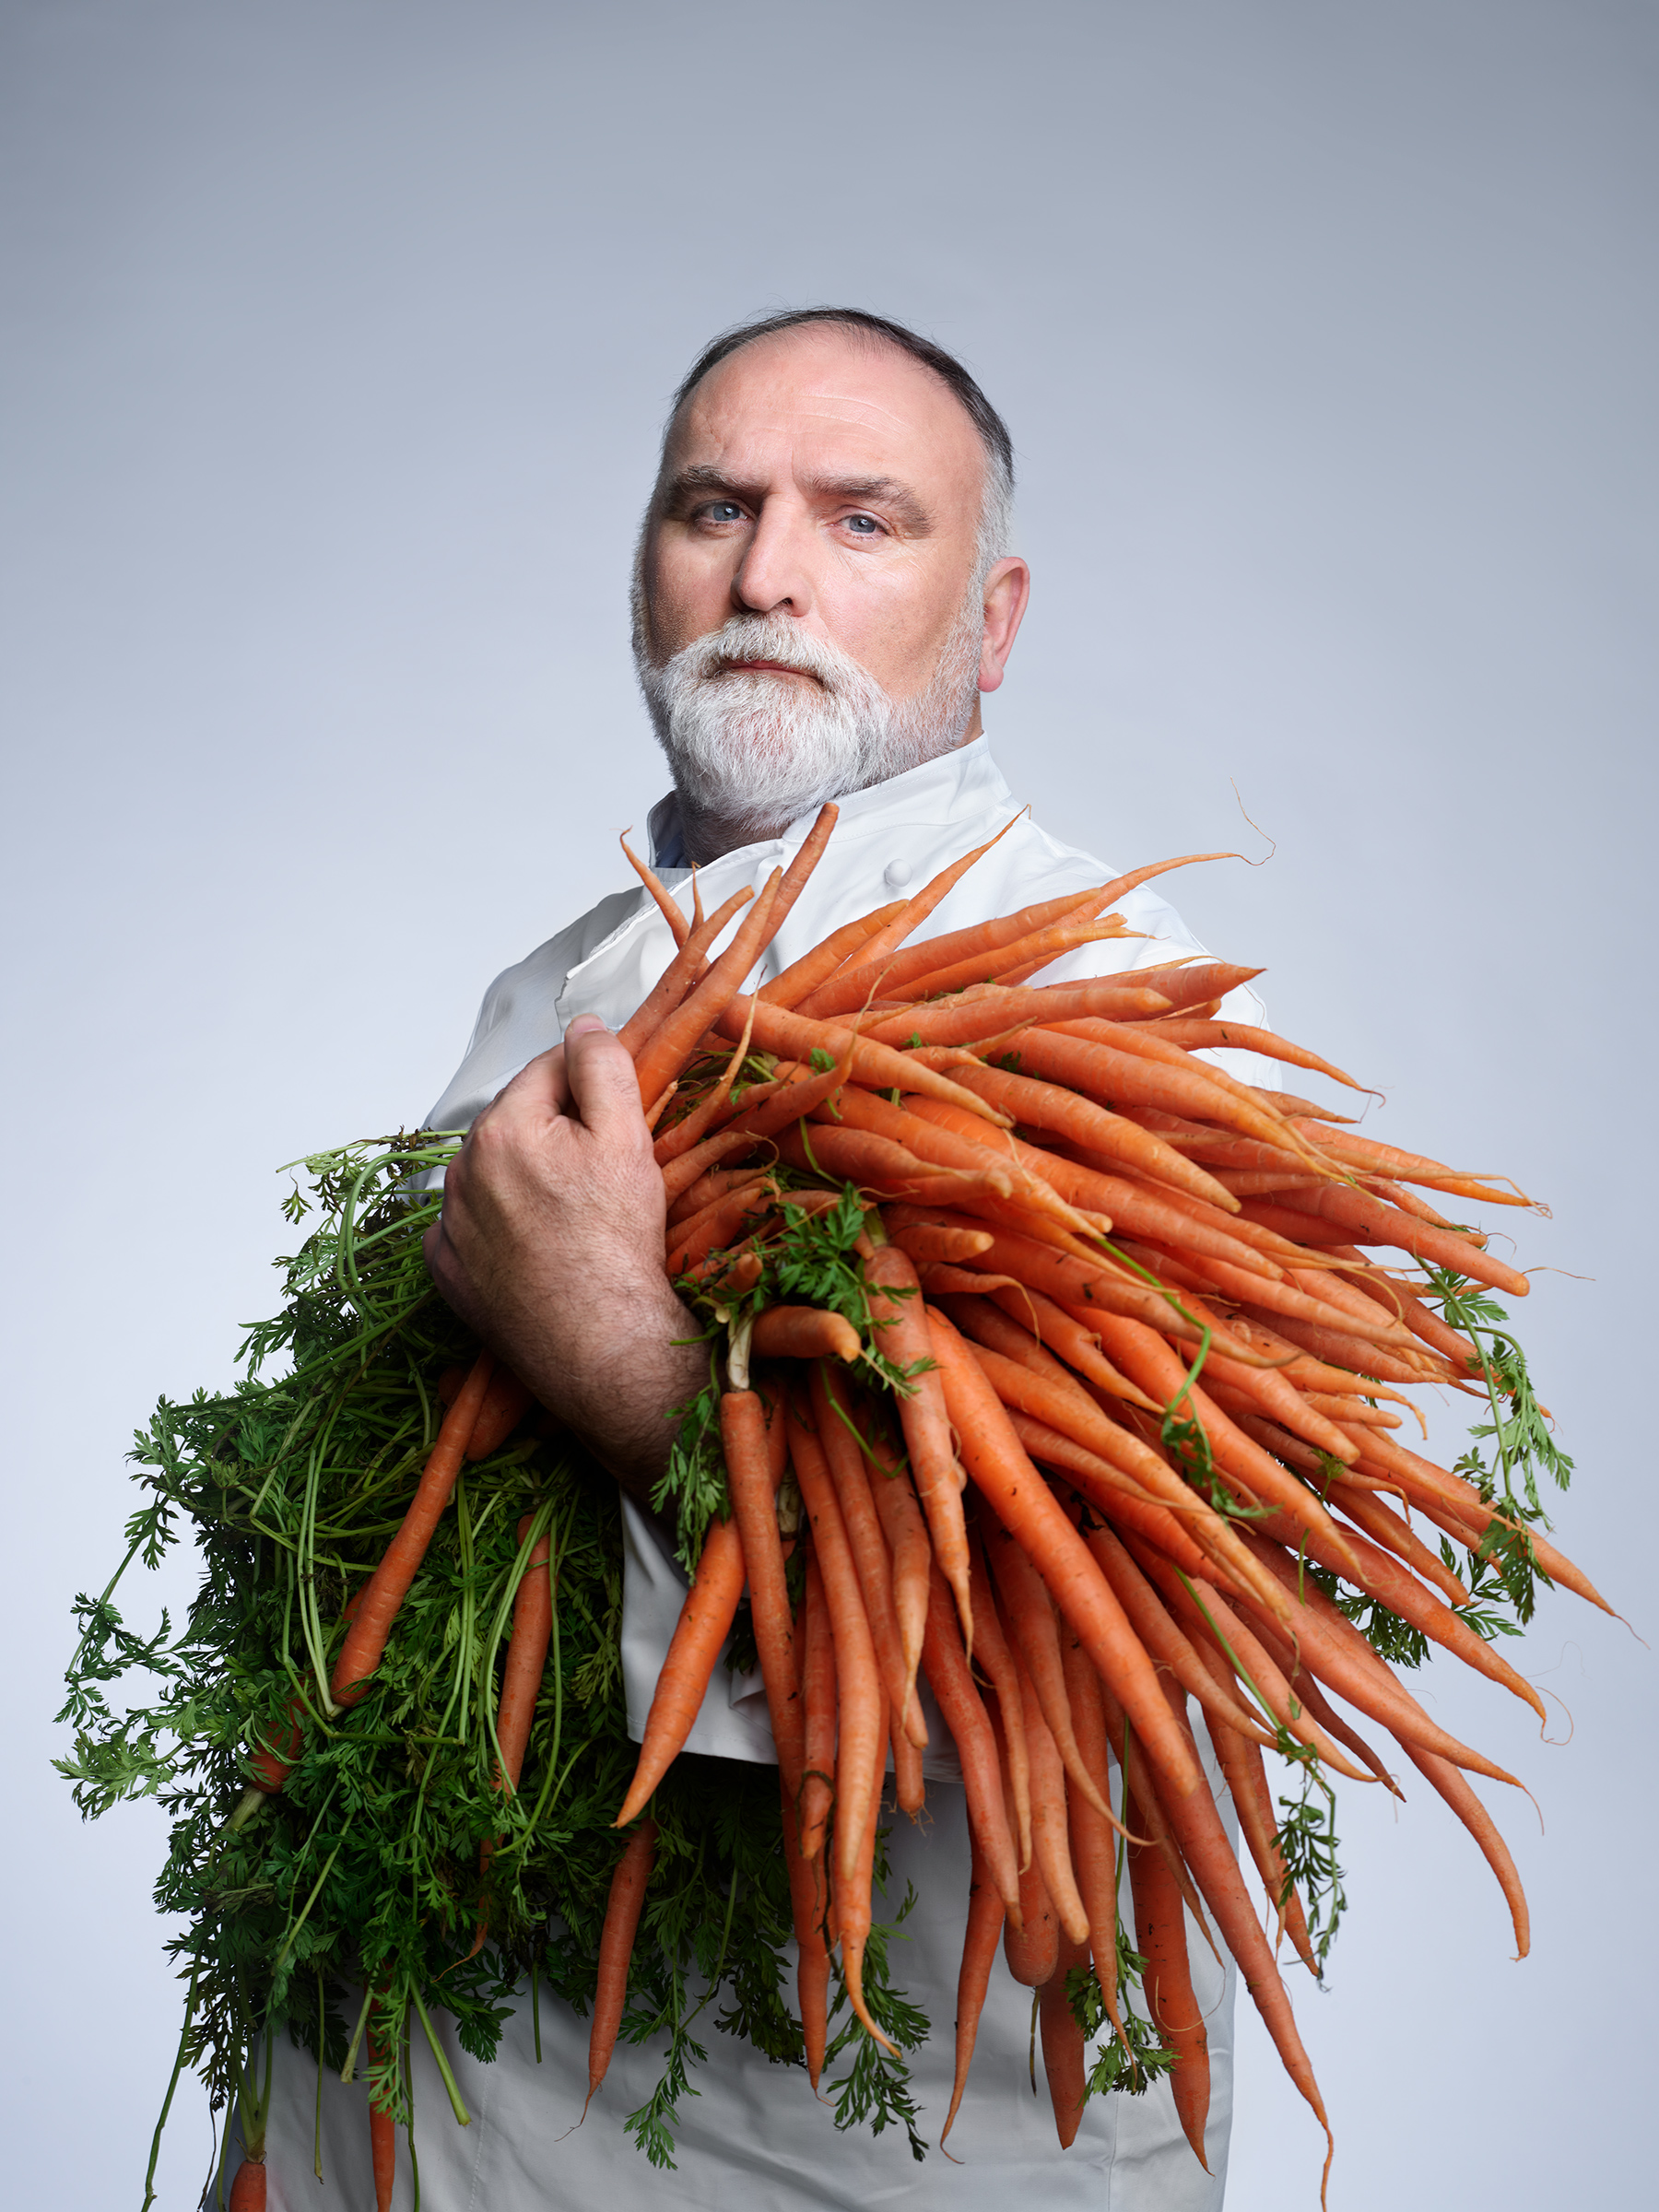 <strong>José Andrés</strong>. "<a href="https://time.com/collection/apart-not-alone/5809169/jose-andres-coronavirus-food/">Chef on a Mission</a>," April 6-13 issue. (Martin Schoeller for TIME)